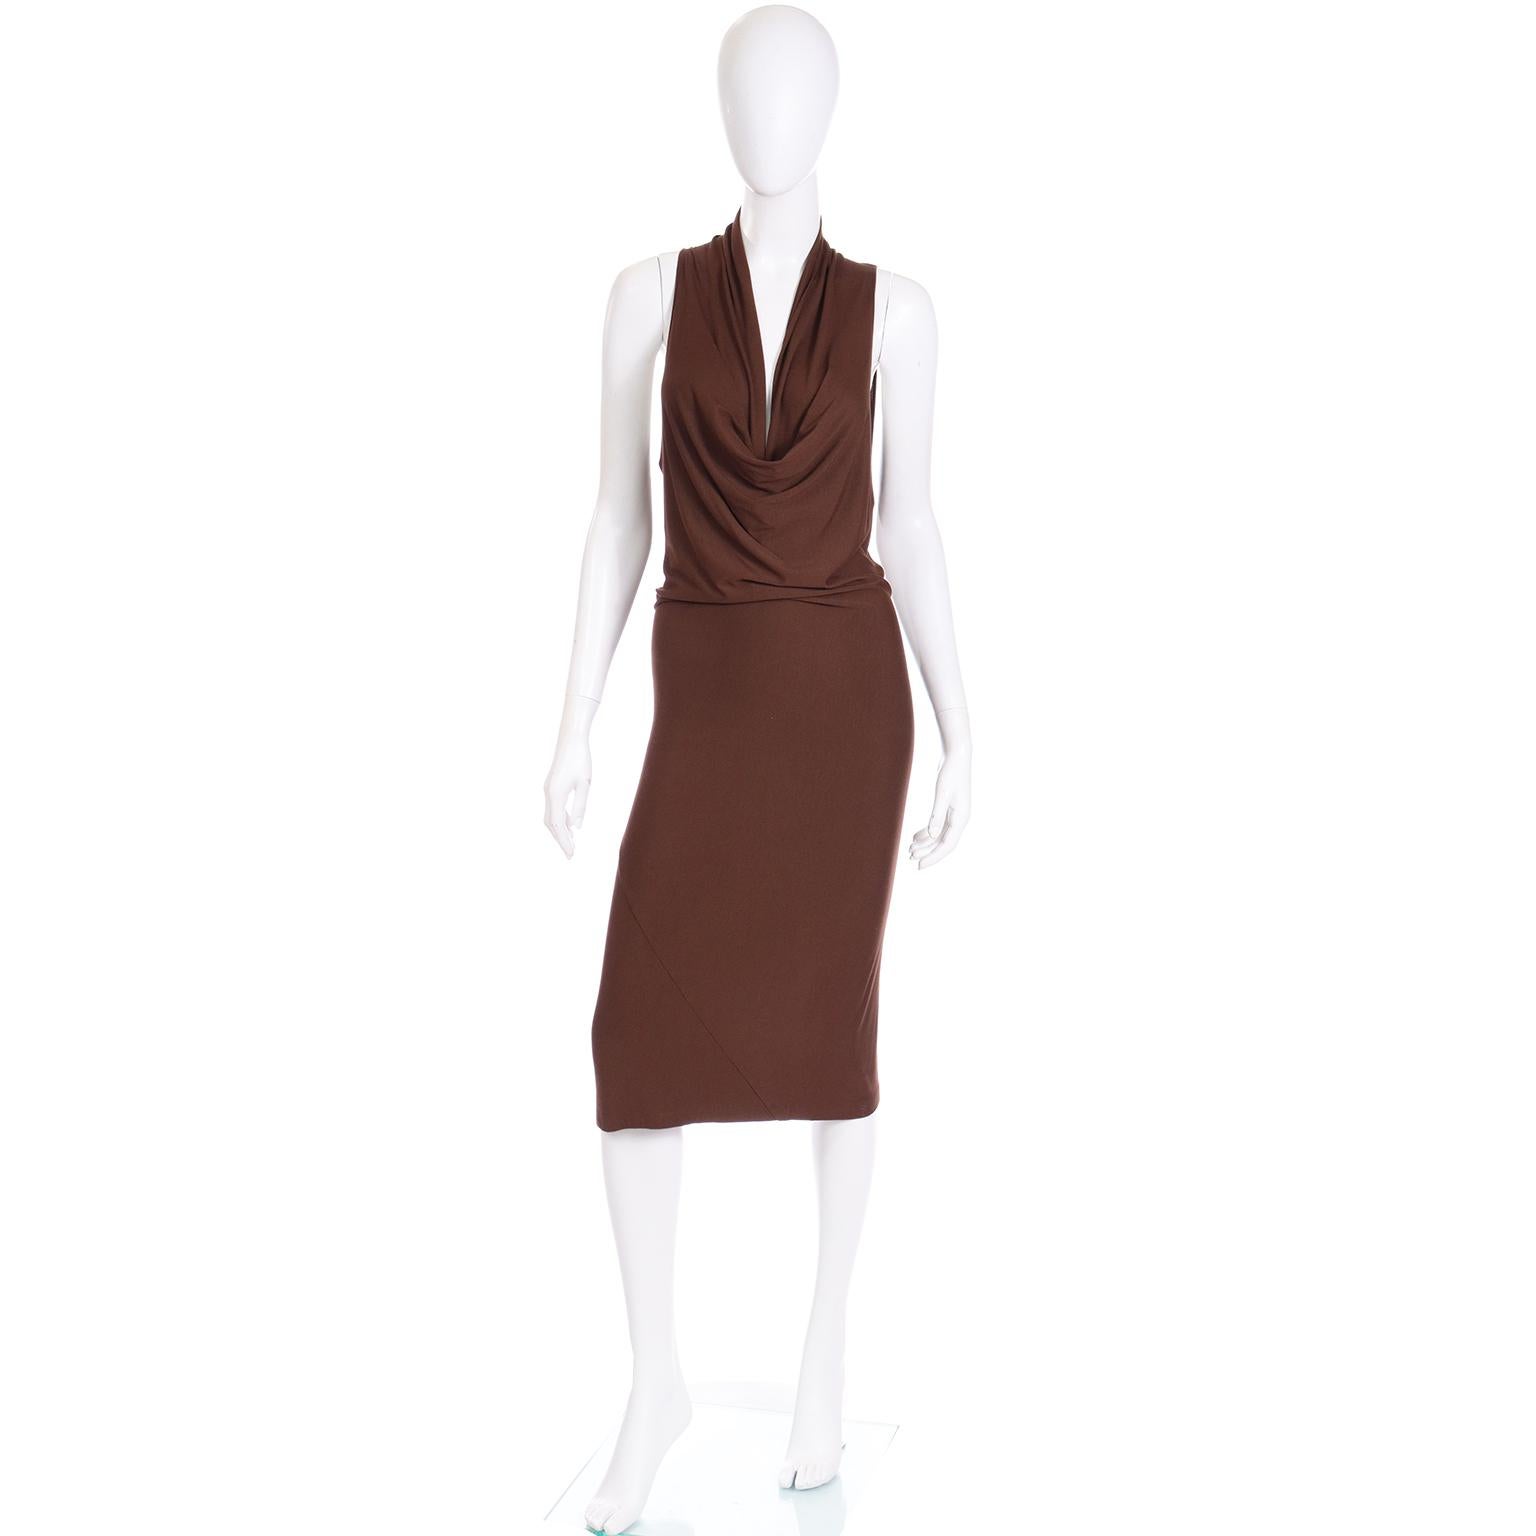 We always love finding older vintage Donna Karan pieces! This is a gorgeous early 1990's Donna Karan brown stretch jersey dress with a low plunging draped neckline and pintucked front. This minimalist dramatic dress slips overhead with no closures